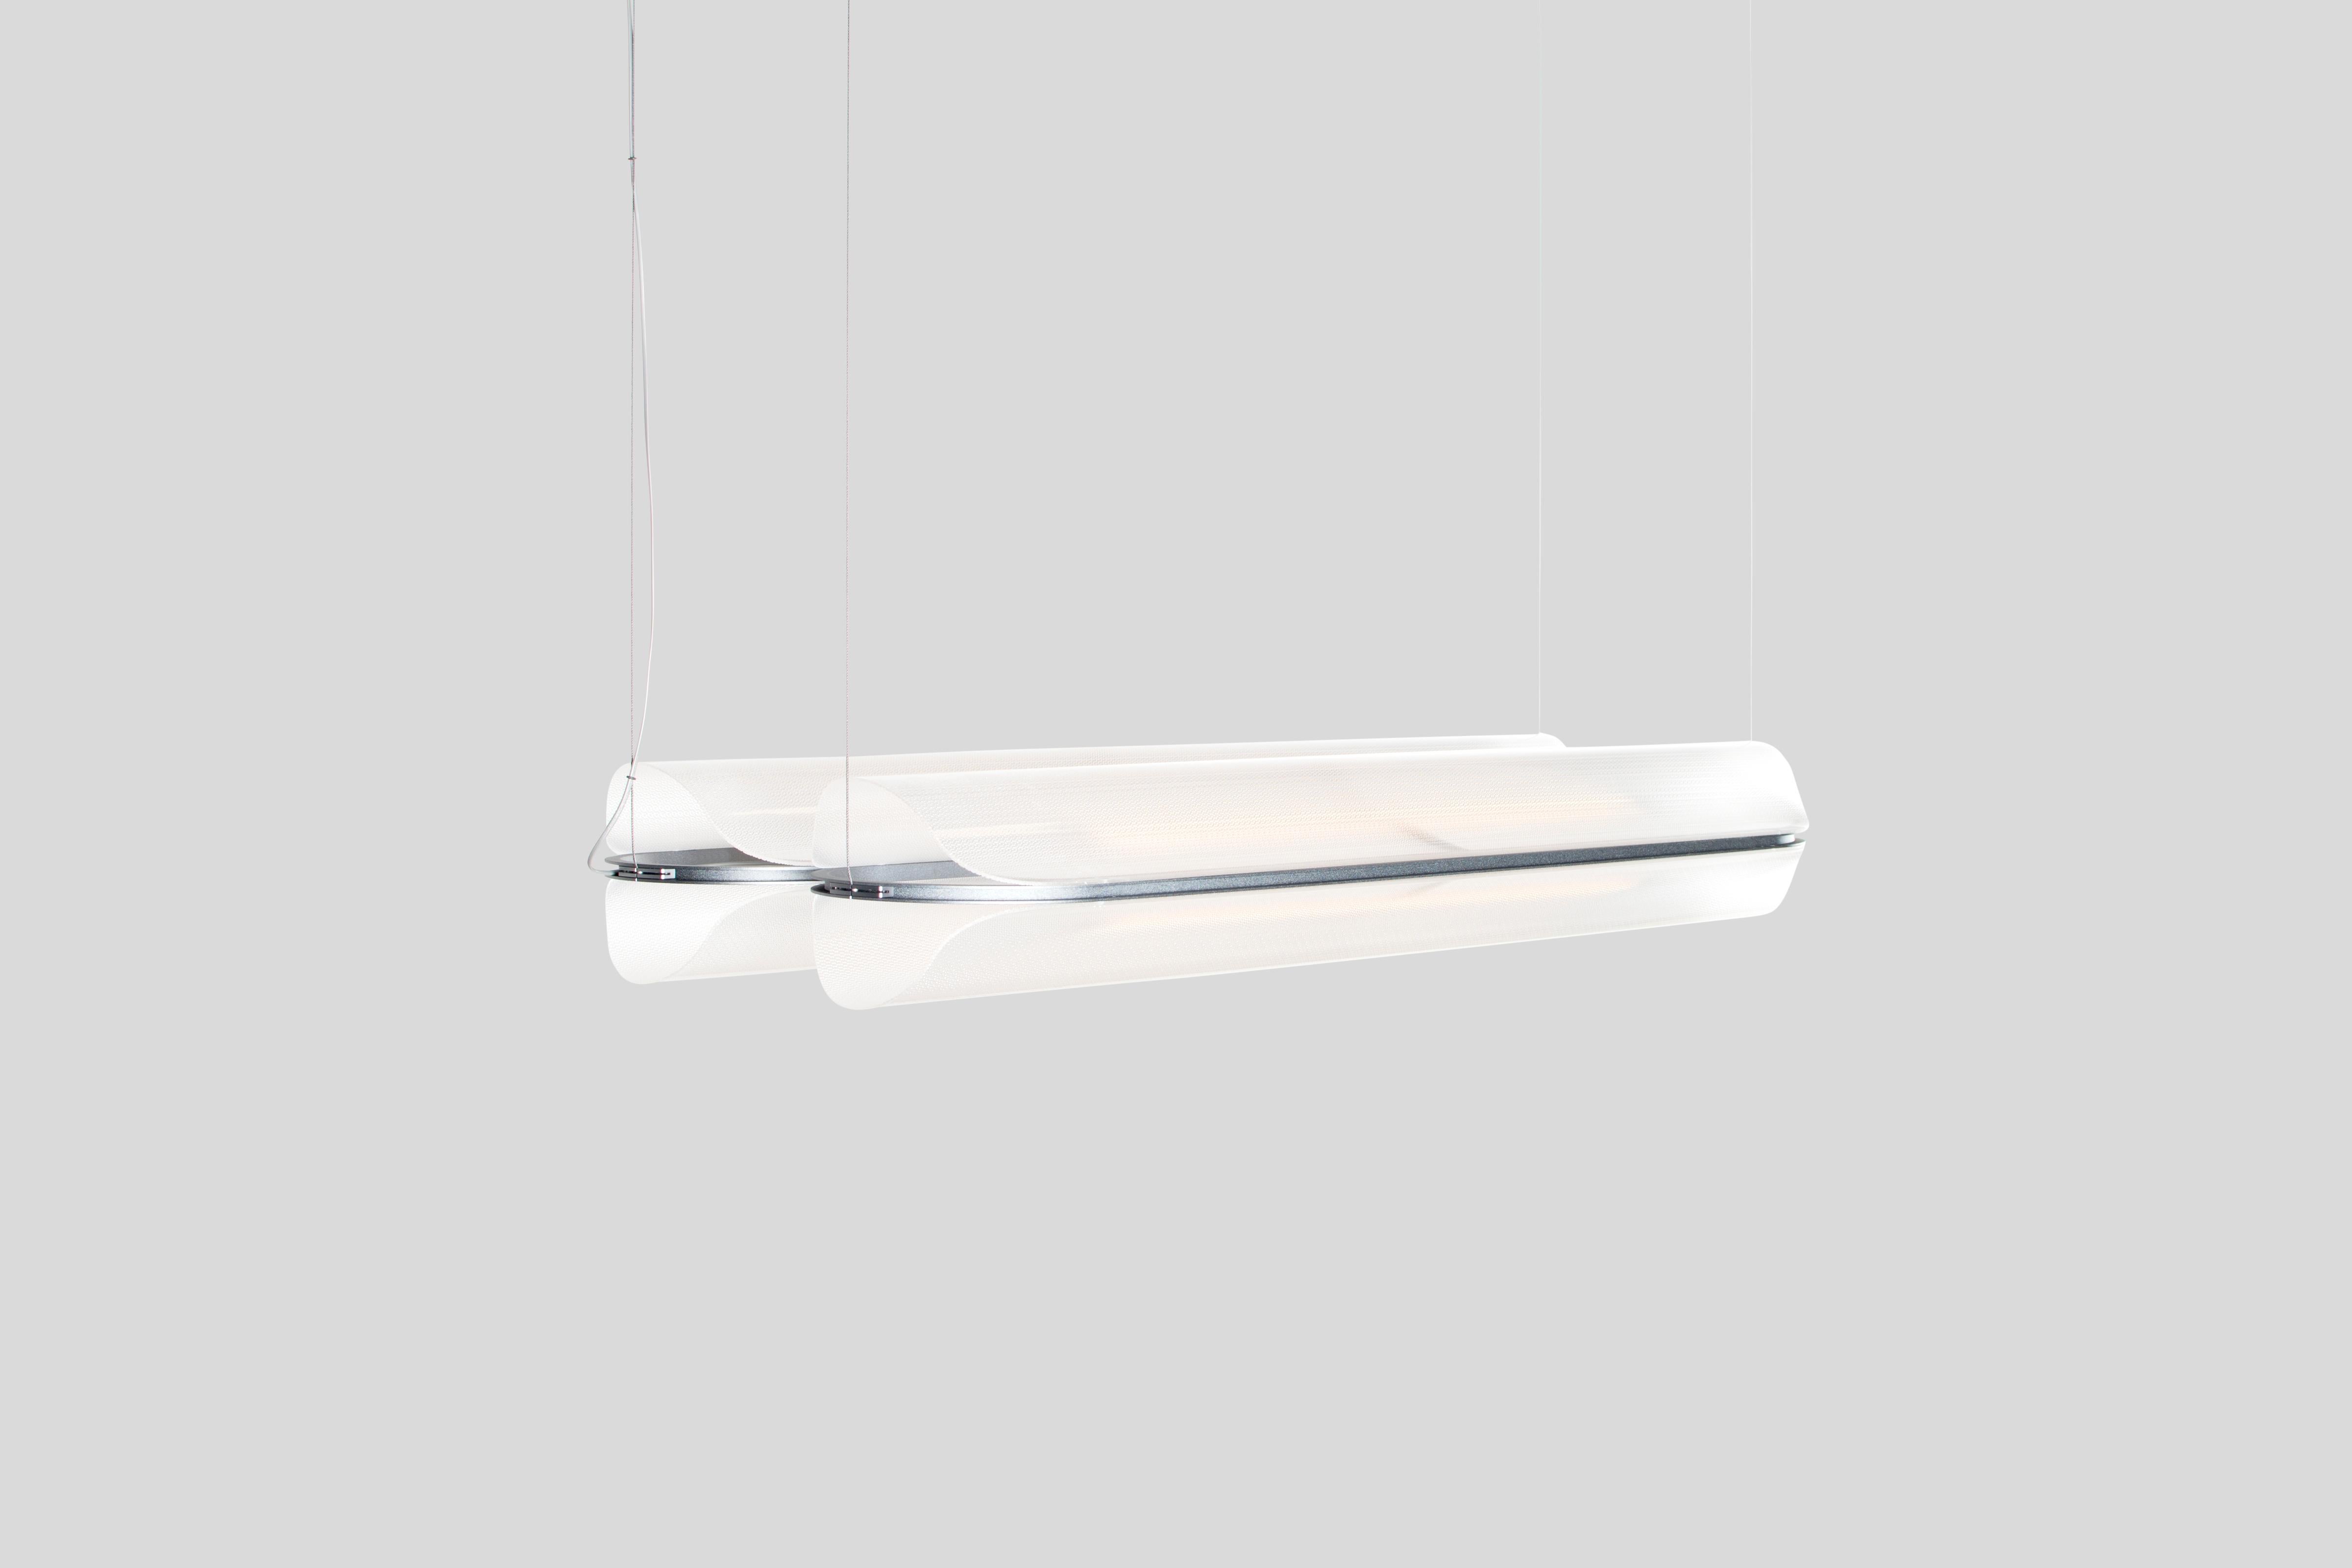 VALE - Pendant lamp
Design: Caine Heintzman, Editor: ANDLight

The Vale series optimises functionality through its multidirectional luminescence while diffusing soft ambient light.

Materials
– Acrylic
– Aluminum

Dimensions
102 x 30 x 23